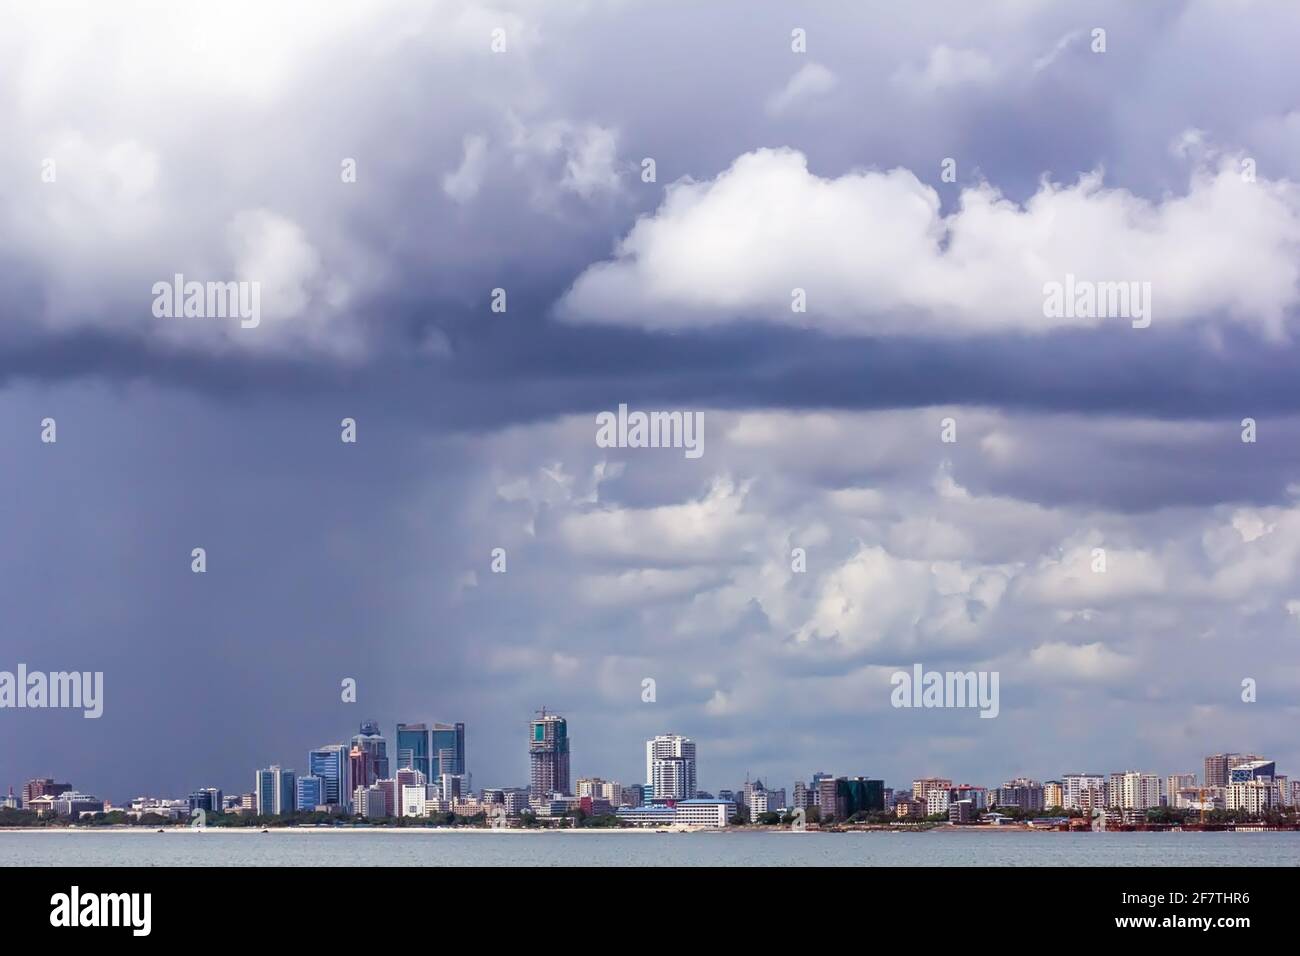 March, 20, 2020 - Dar Es Salaam, Tanzania: panorama of Dar Es Salaam from the water under a stormy sky Stock Photo